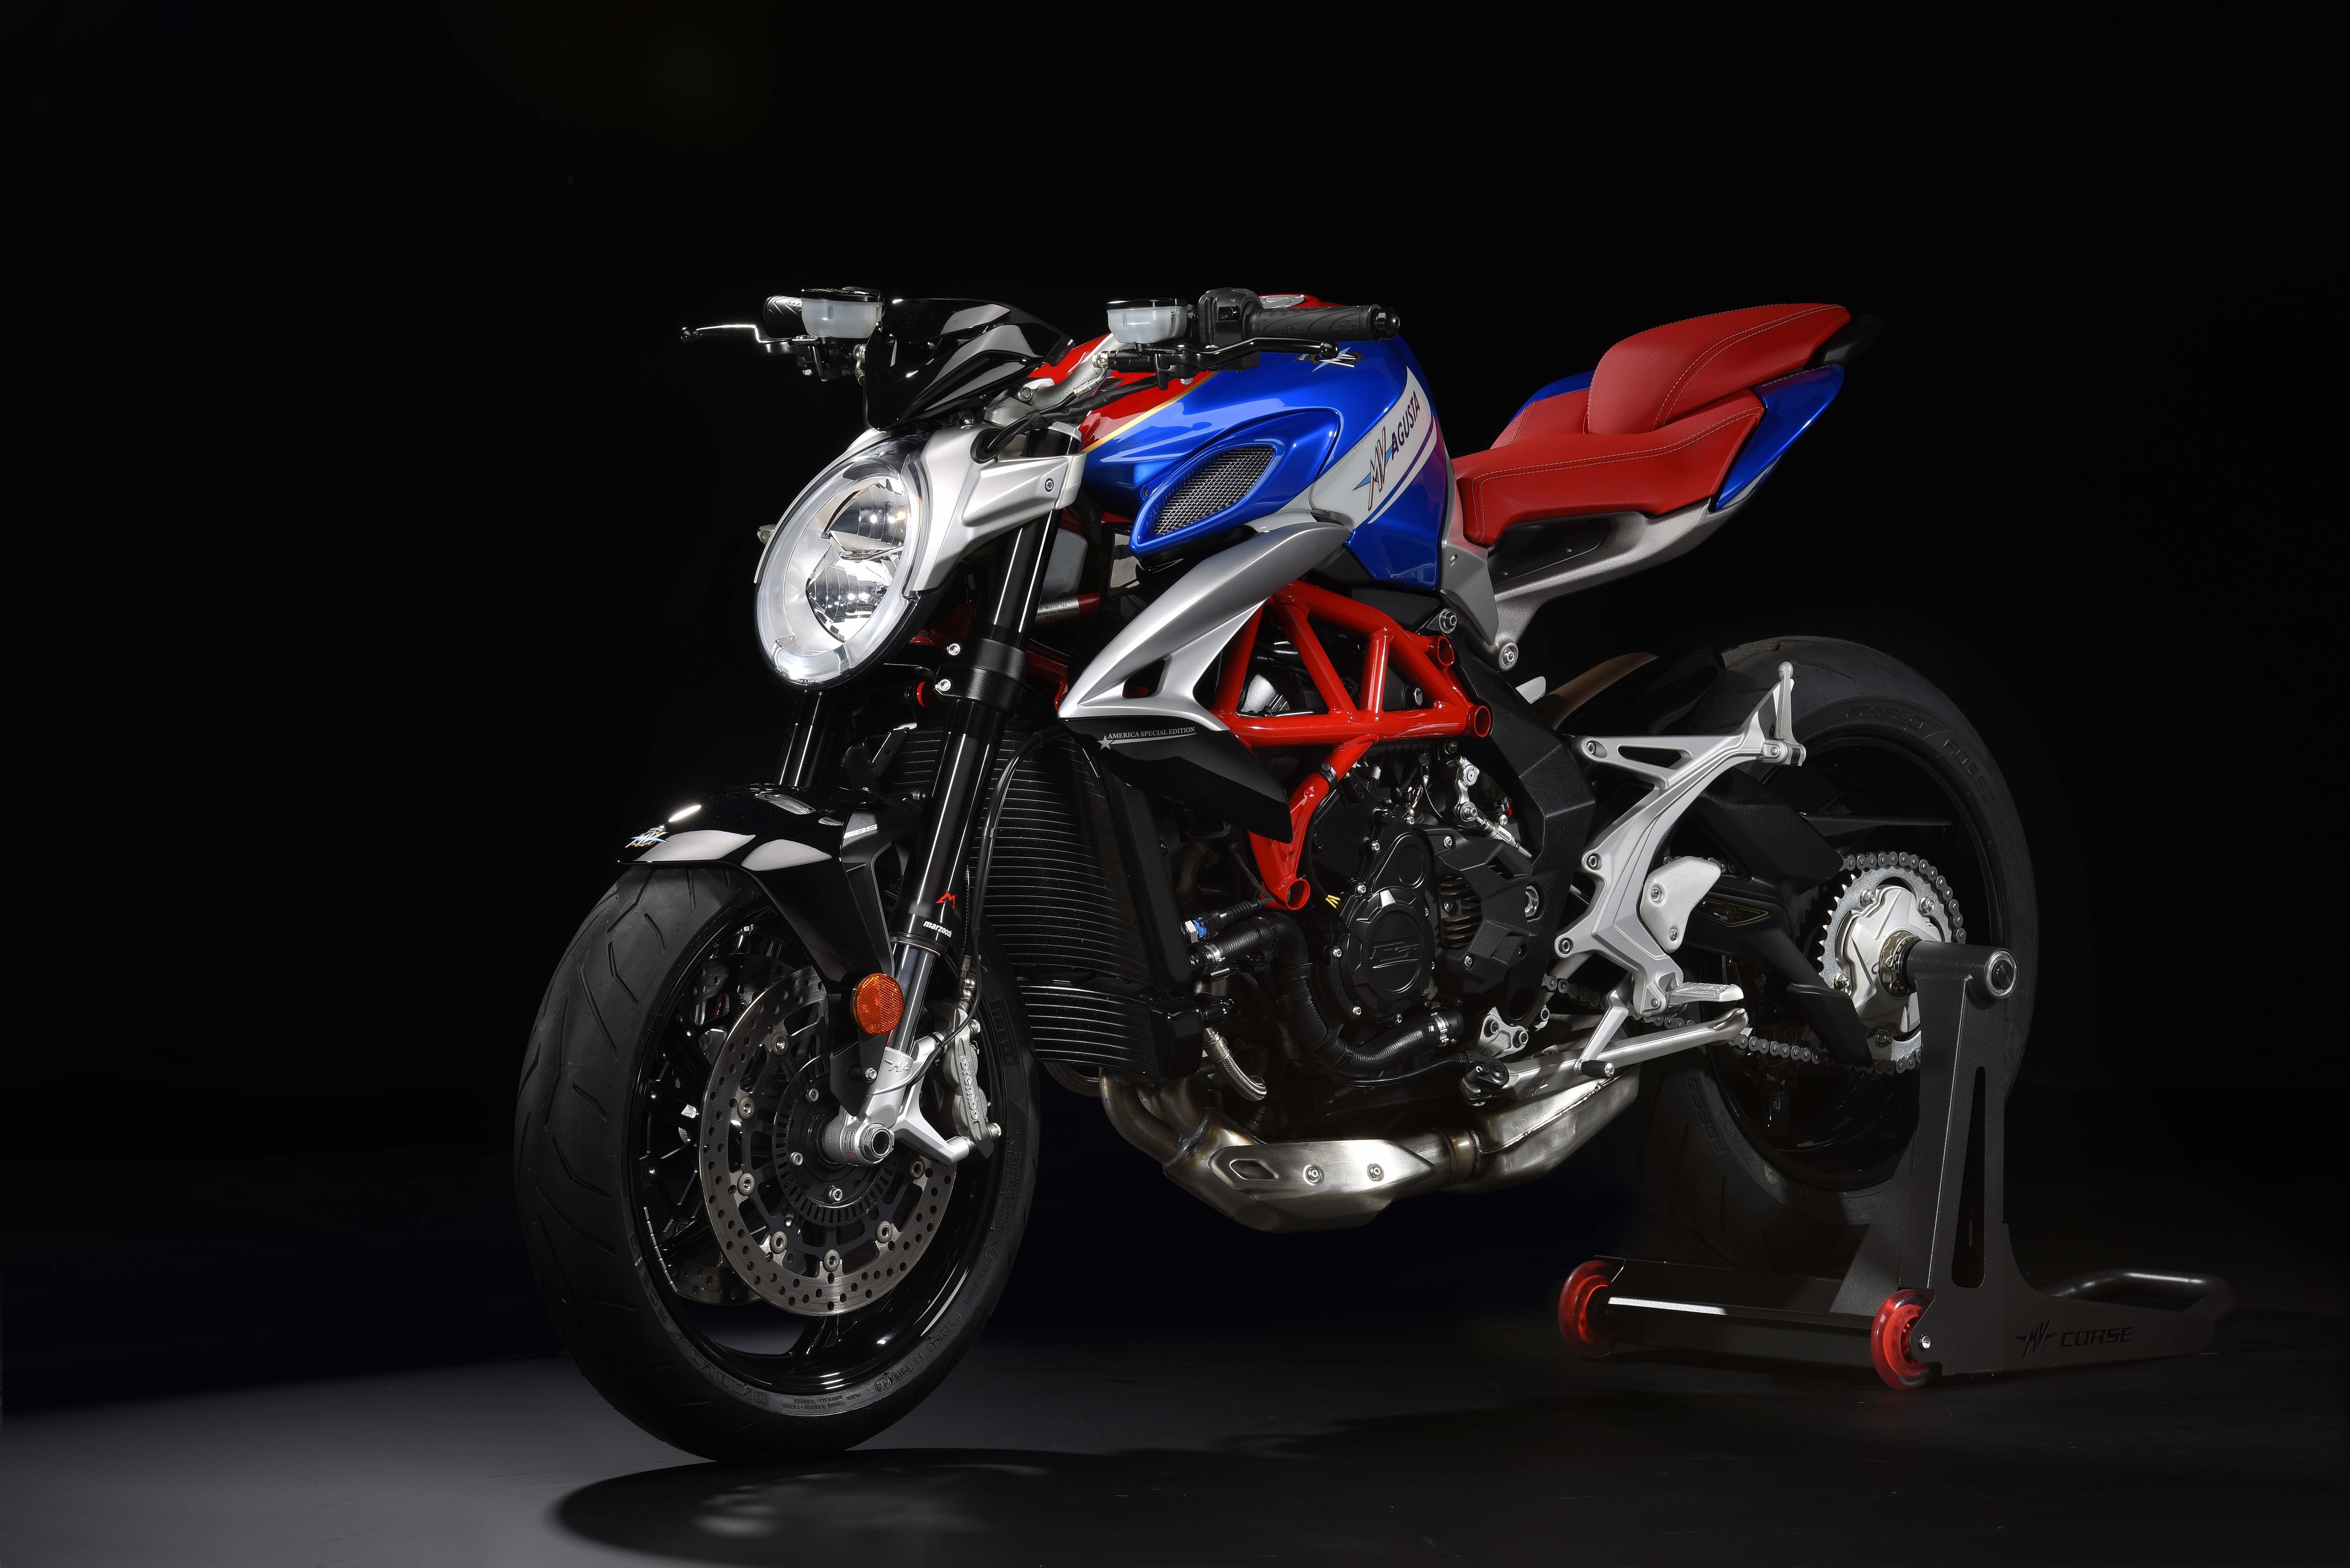 Motorcycle MV Agusta Brutale 800 America on a black background wallpaper and image, picture, photo